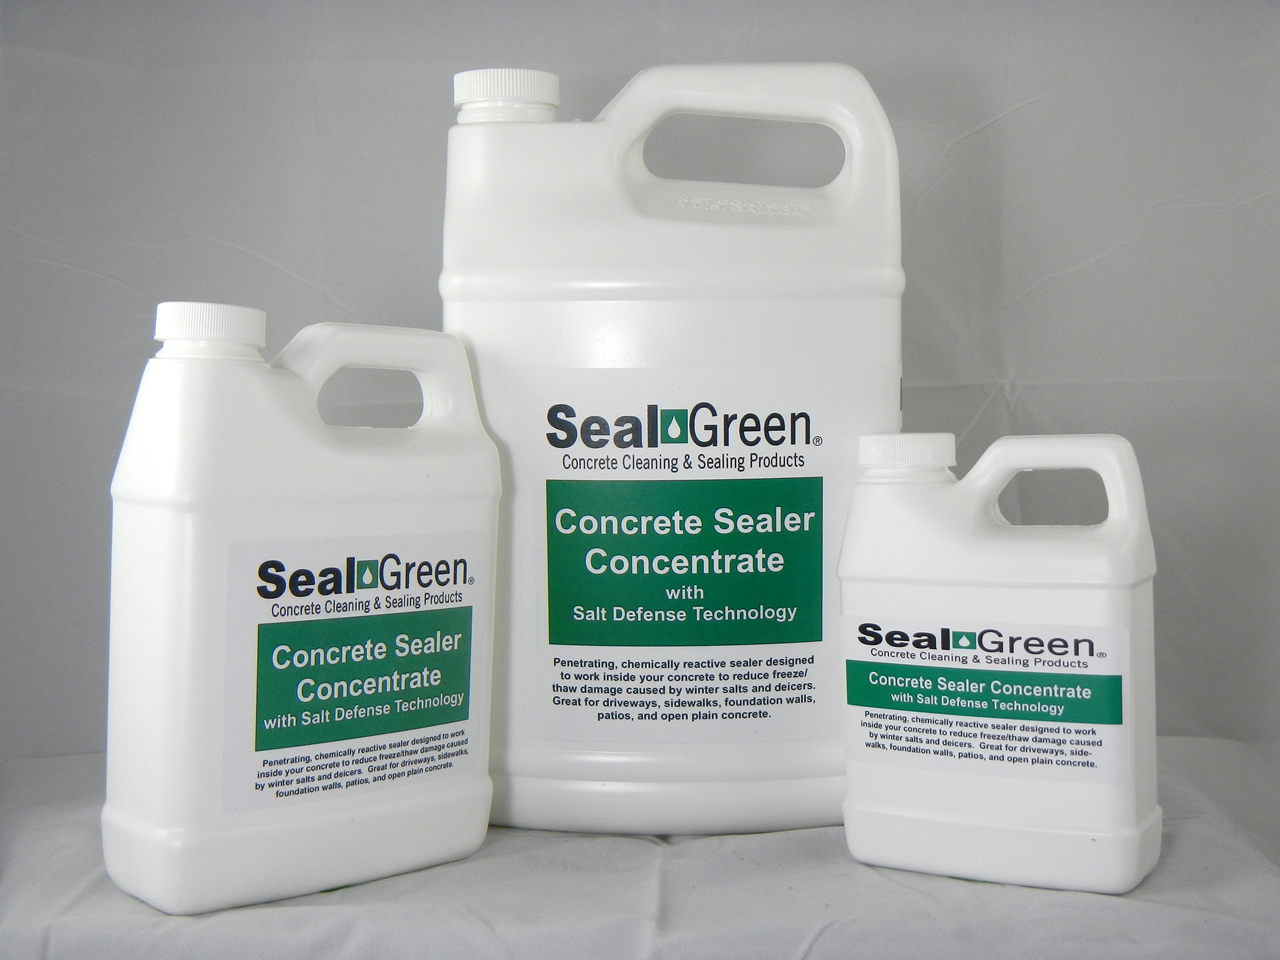 Concrete Sealer Concentrate with Salt Defense Technology Questions & Answers